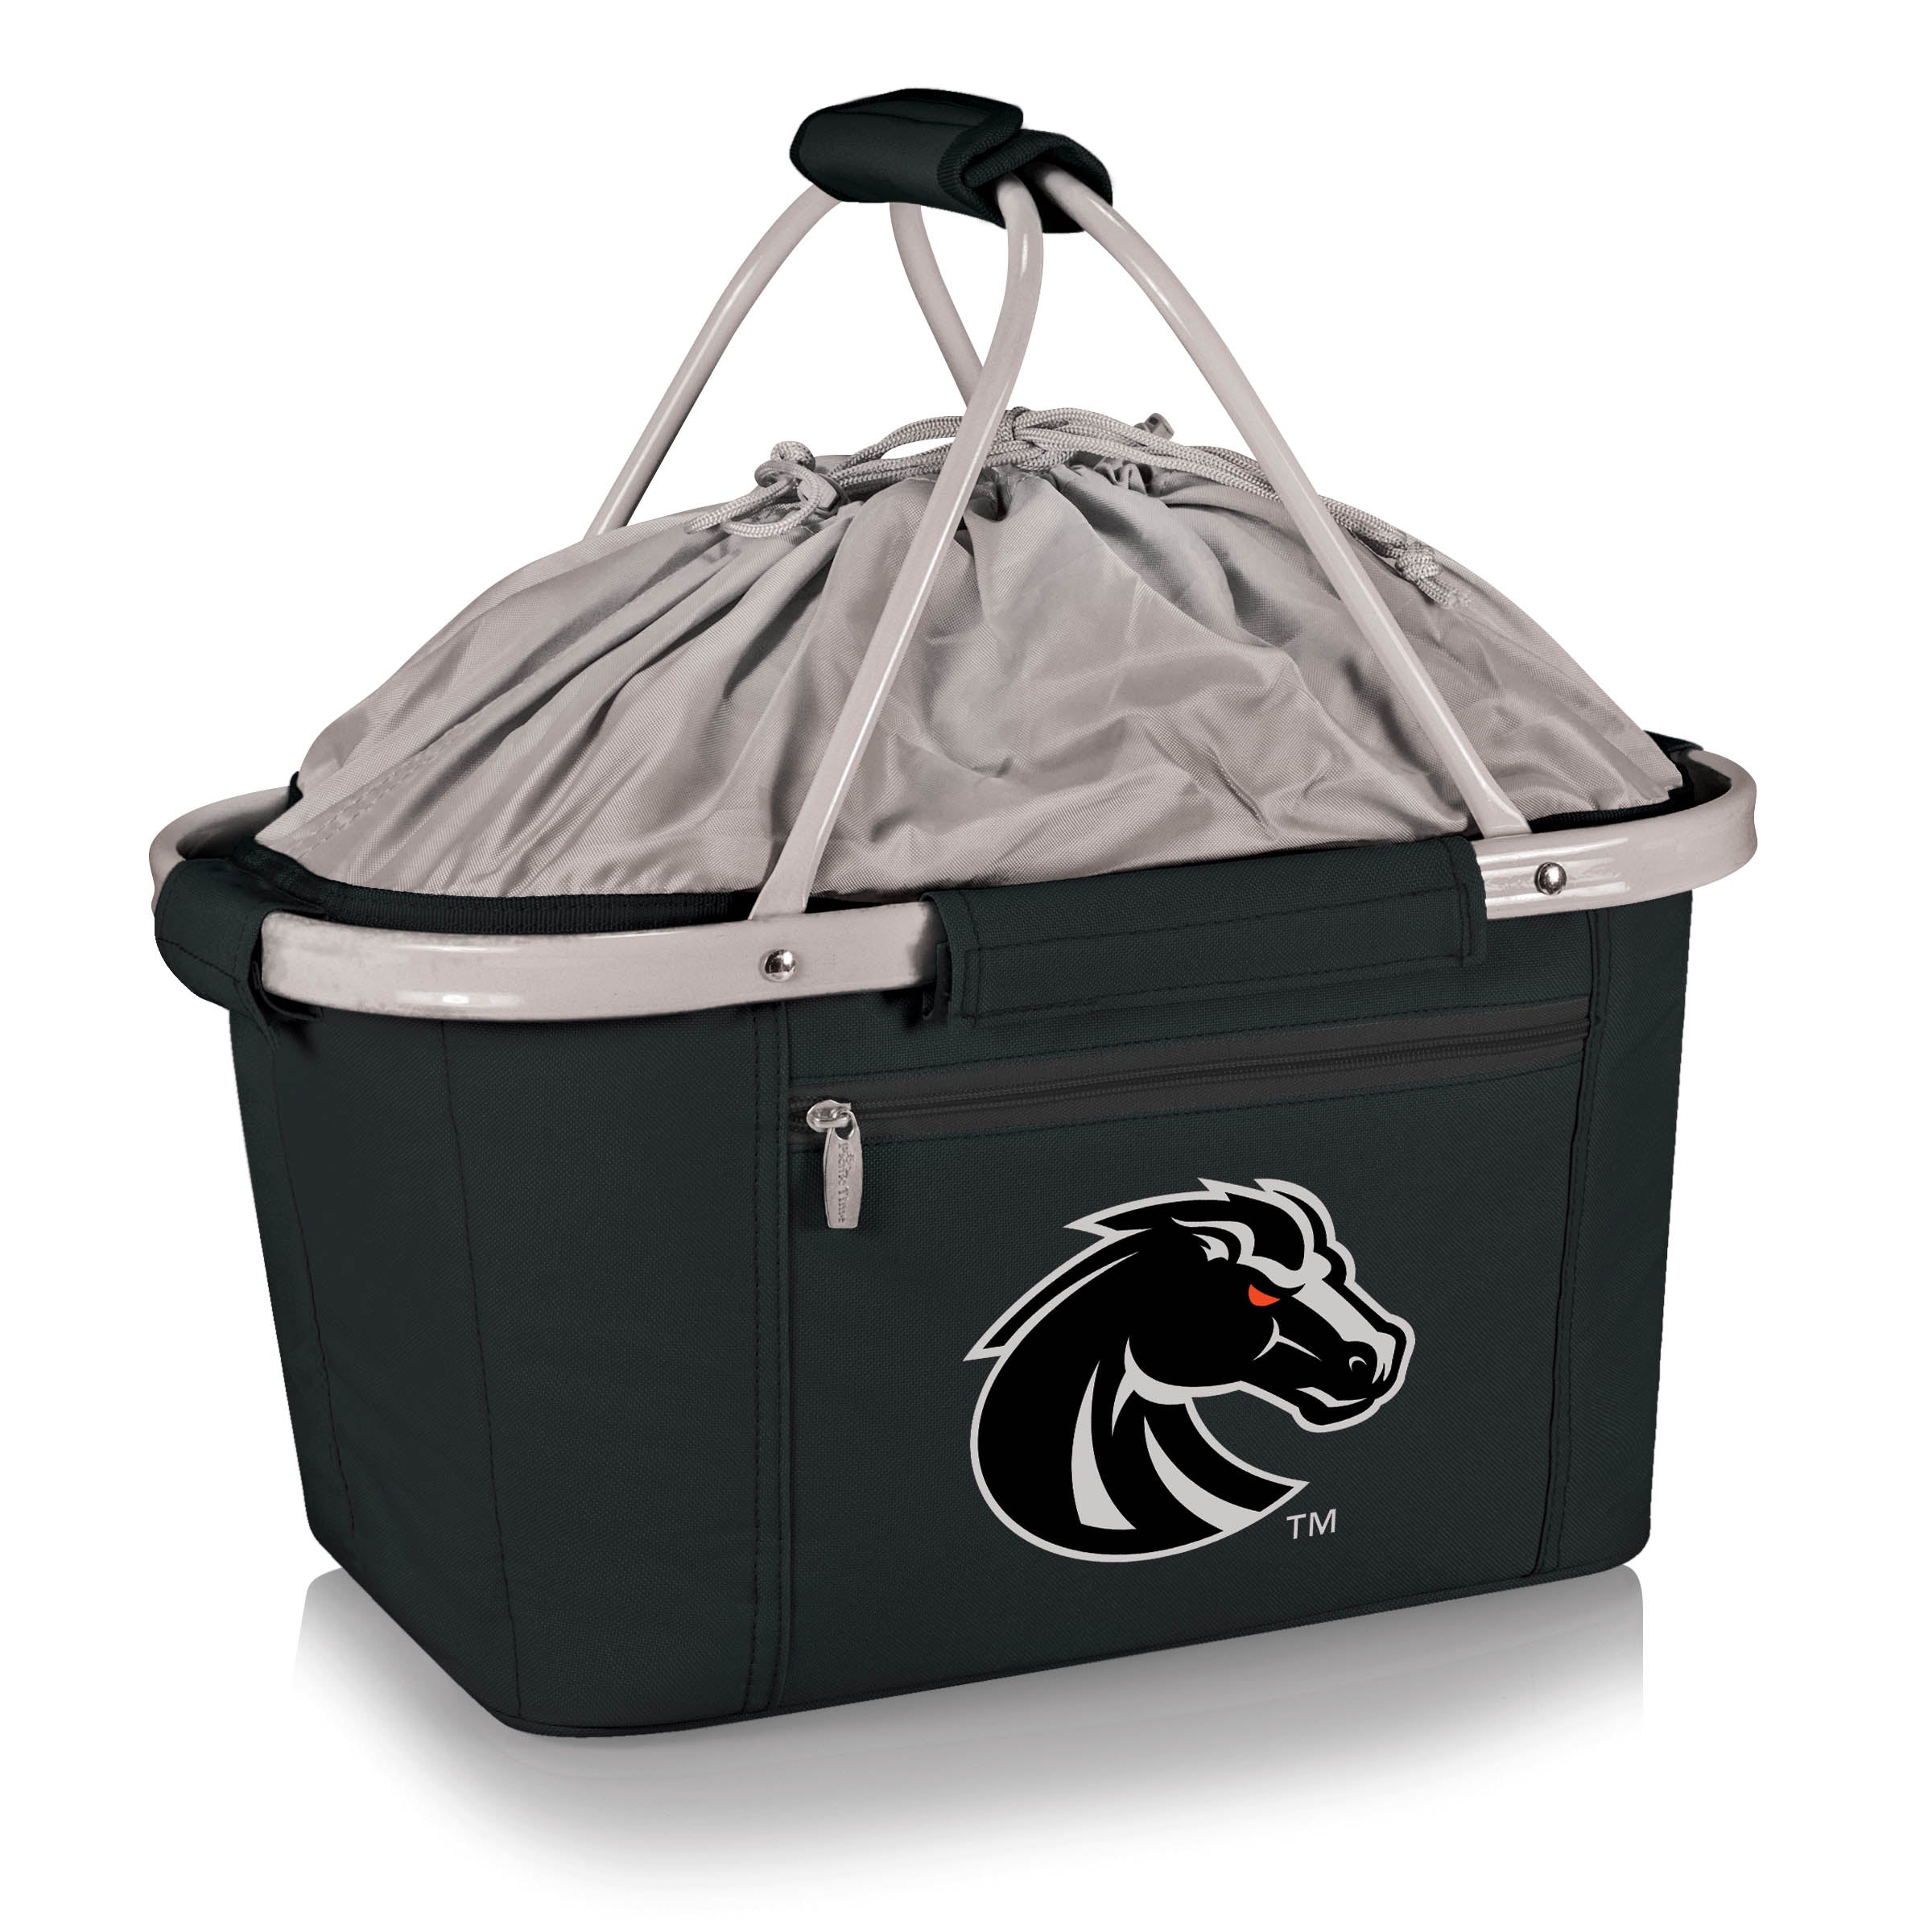 Boise State Broncos - Metro Basket Collapsible Cooler Tote